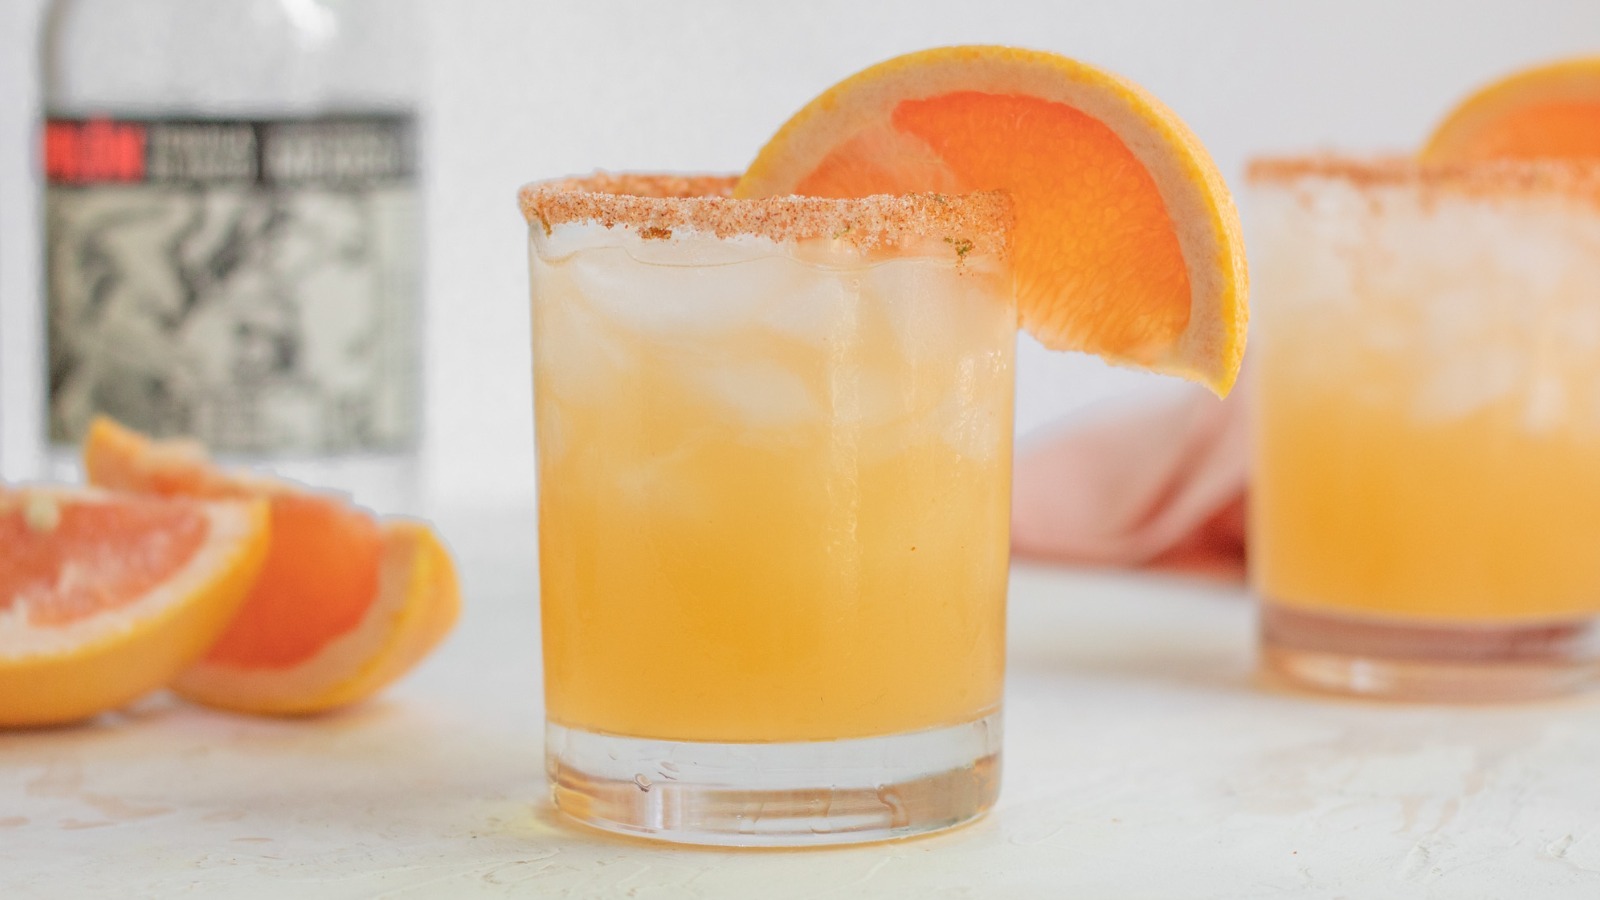 https://www.mashed.com/img/gallery/classic-paloma-cocktail-recipe/l-intro-1654976266.jpg